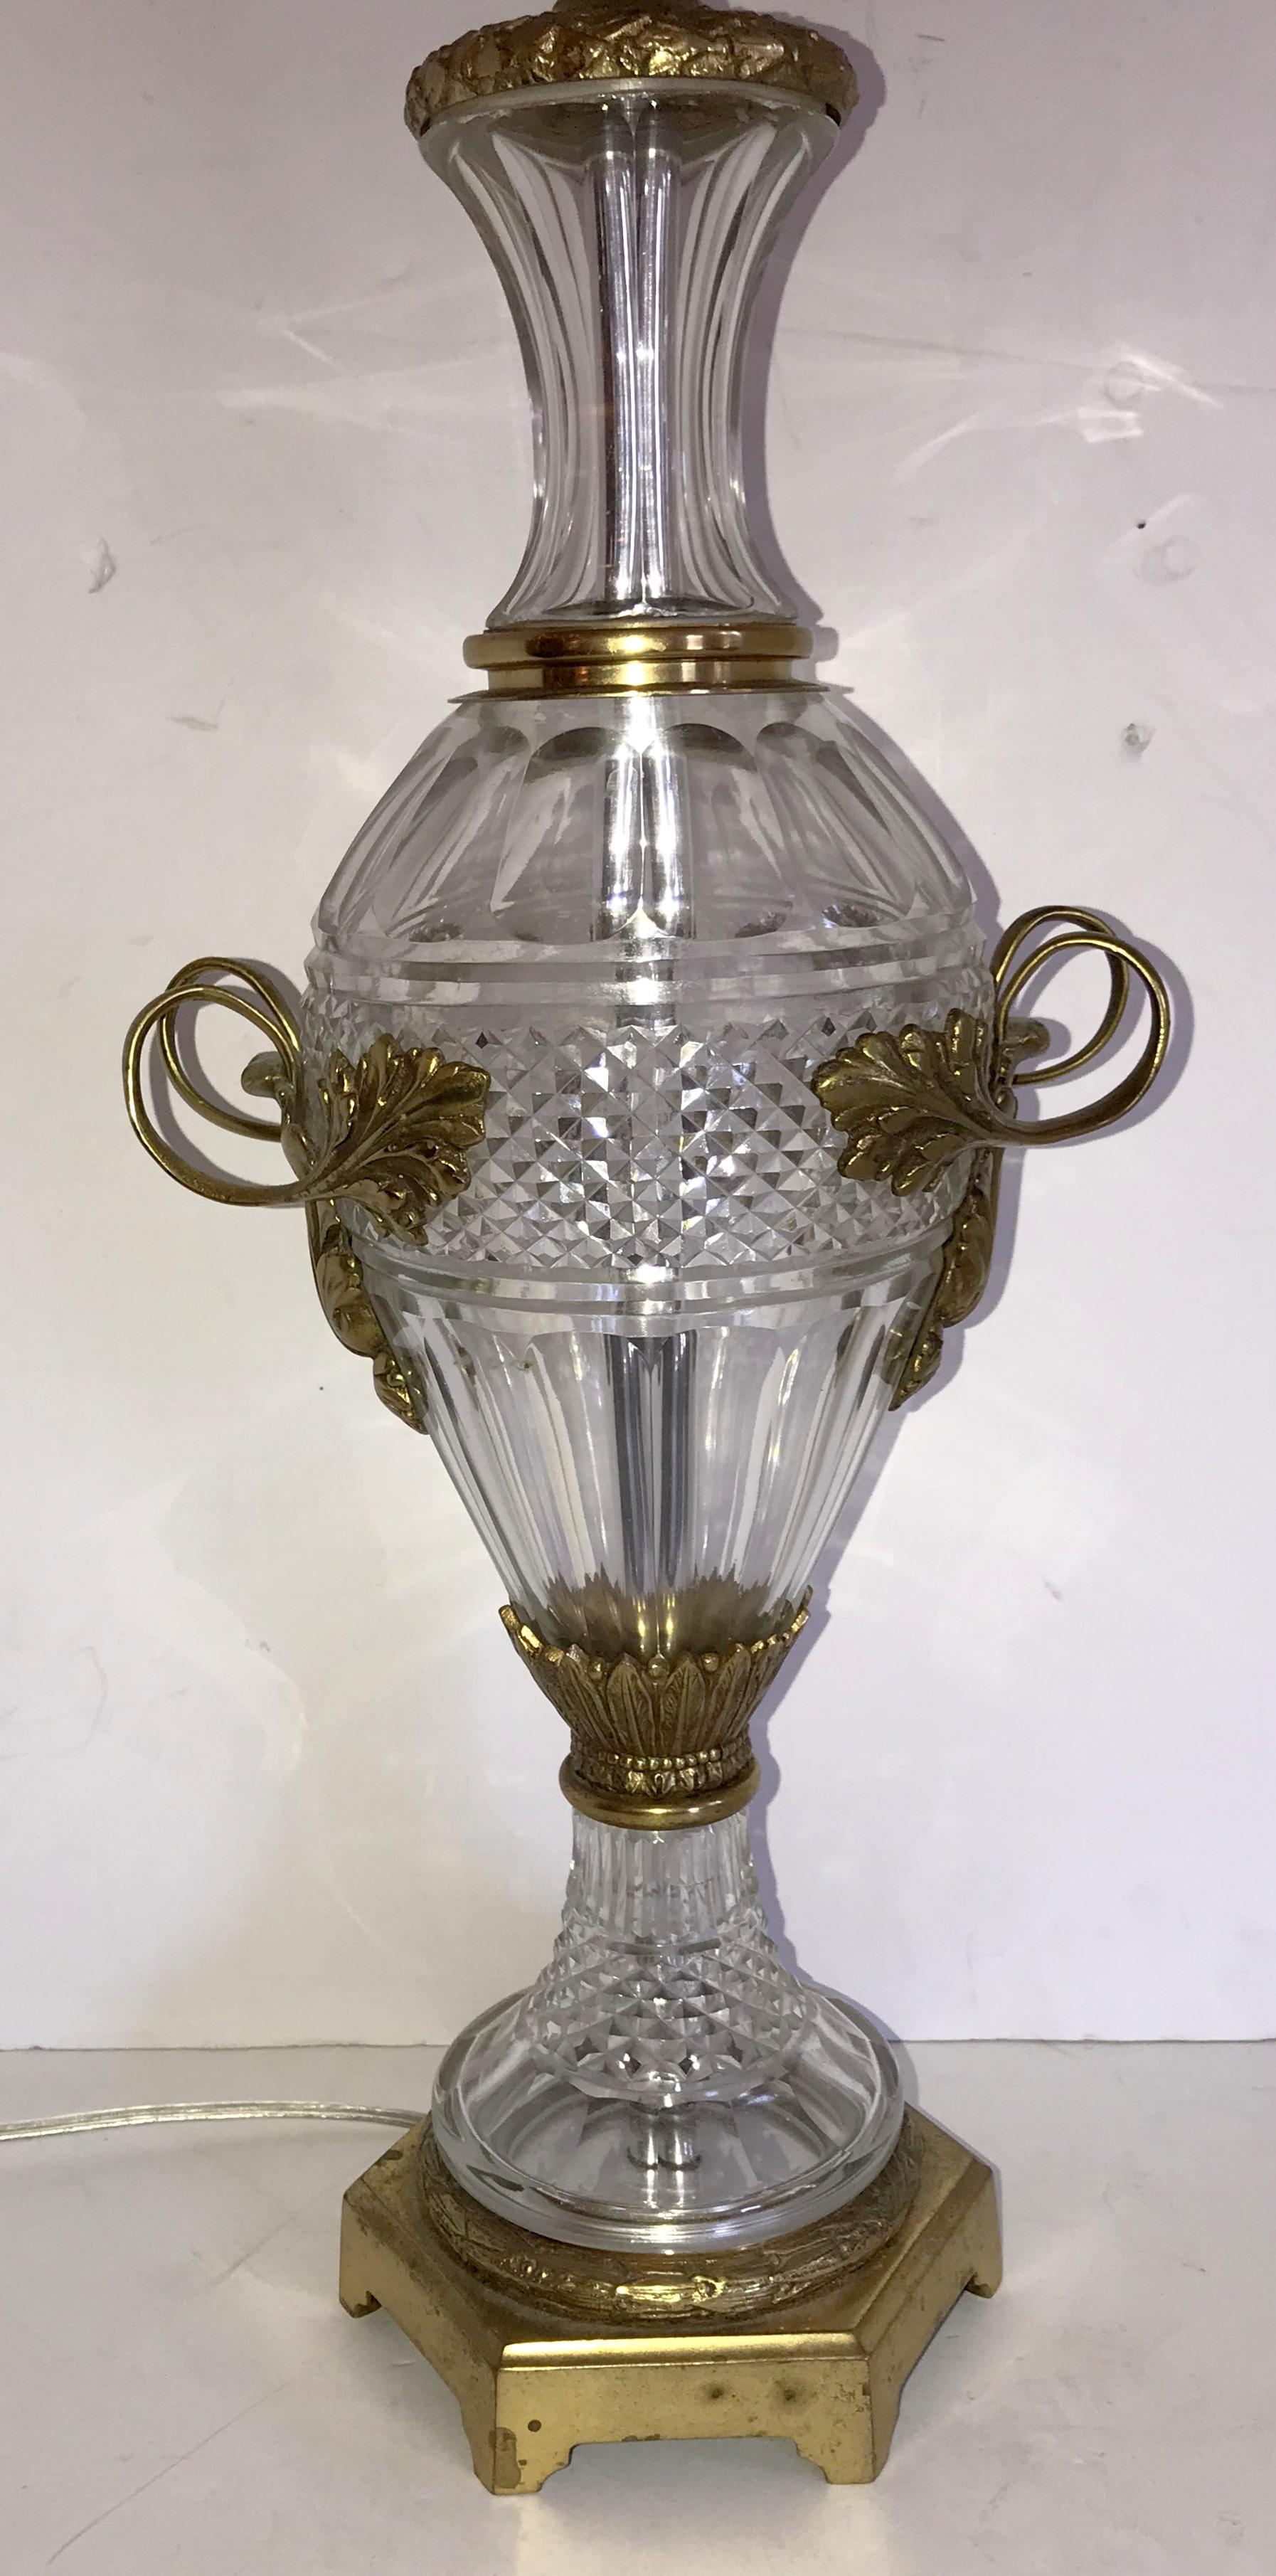 Beautiful pair of cut crystal urn form and doré bronze-mounted French lamps. The leaf decor handles along with the pedestal and base cup have wonderful bronze detailing, rewired with two lights each and a switch on the lead wire.
In The Manner Of